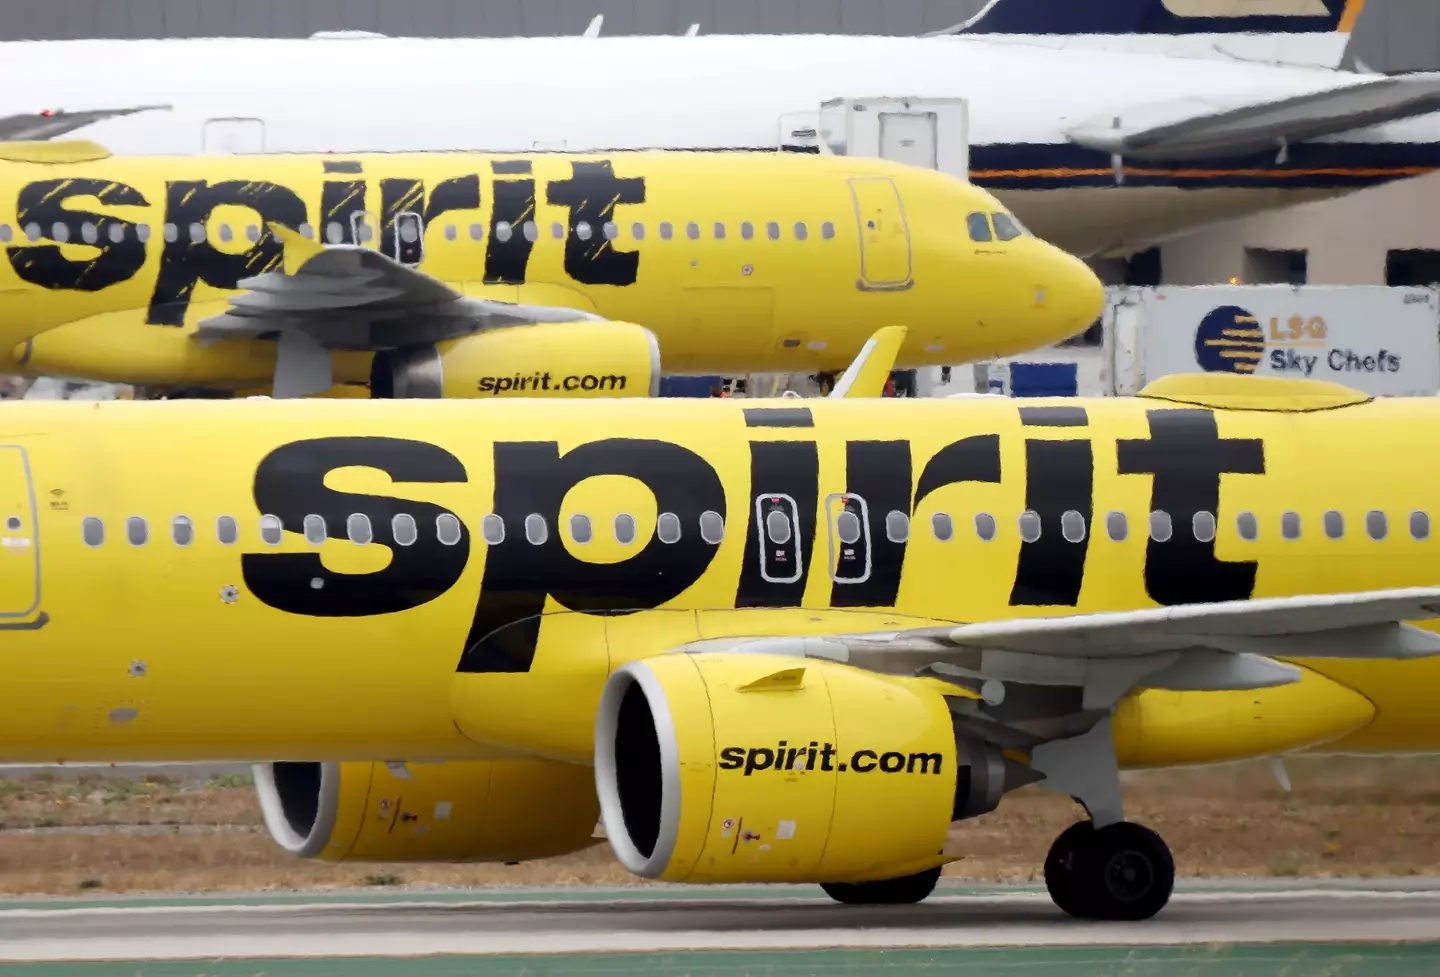 This scary sequence occurred on board a Spirit Airlines flight, but luckily all was fine.